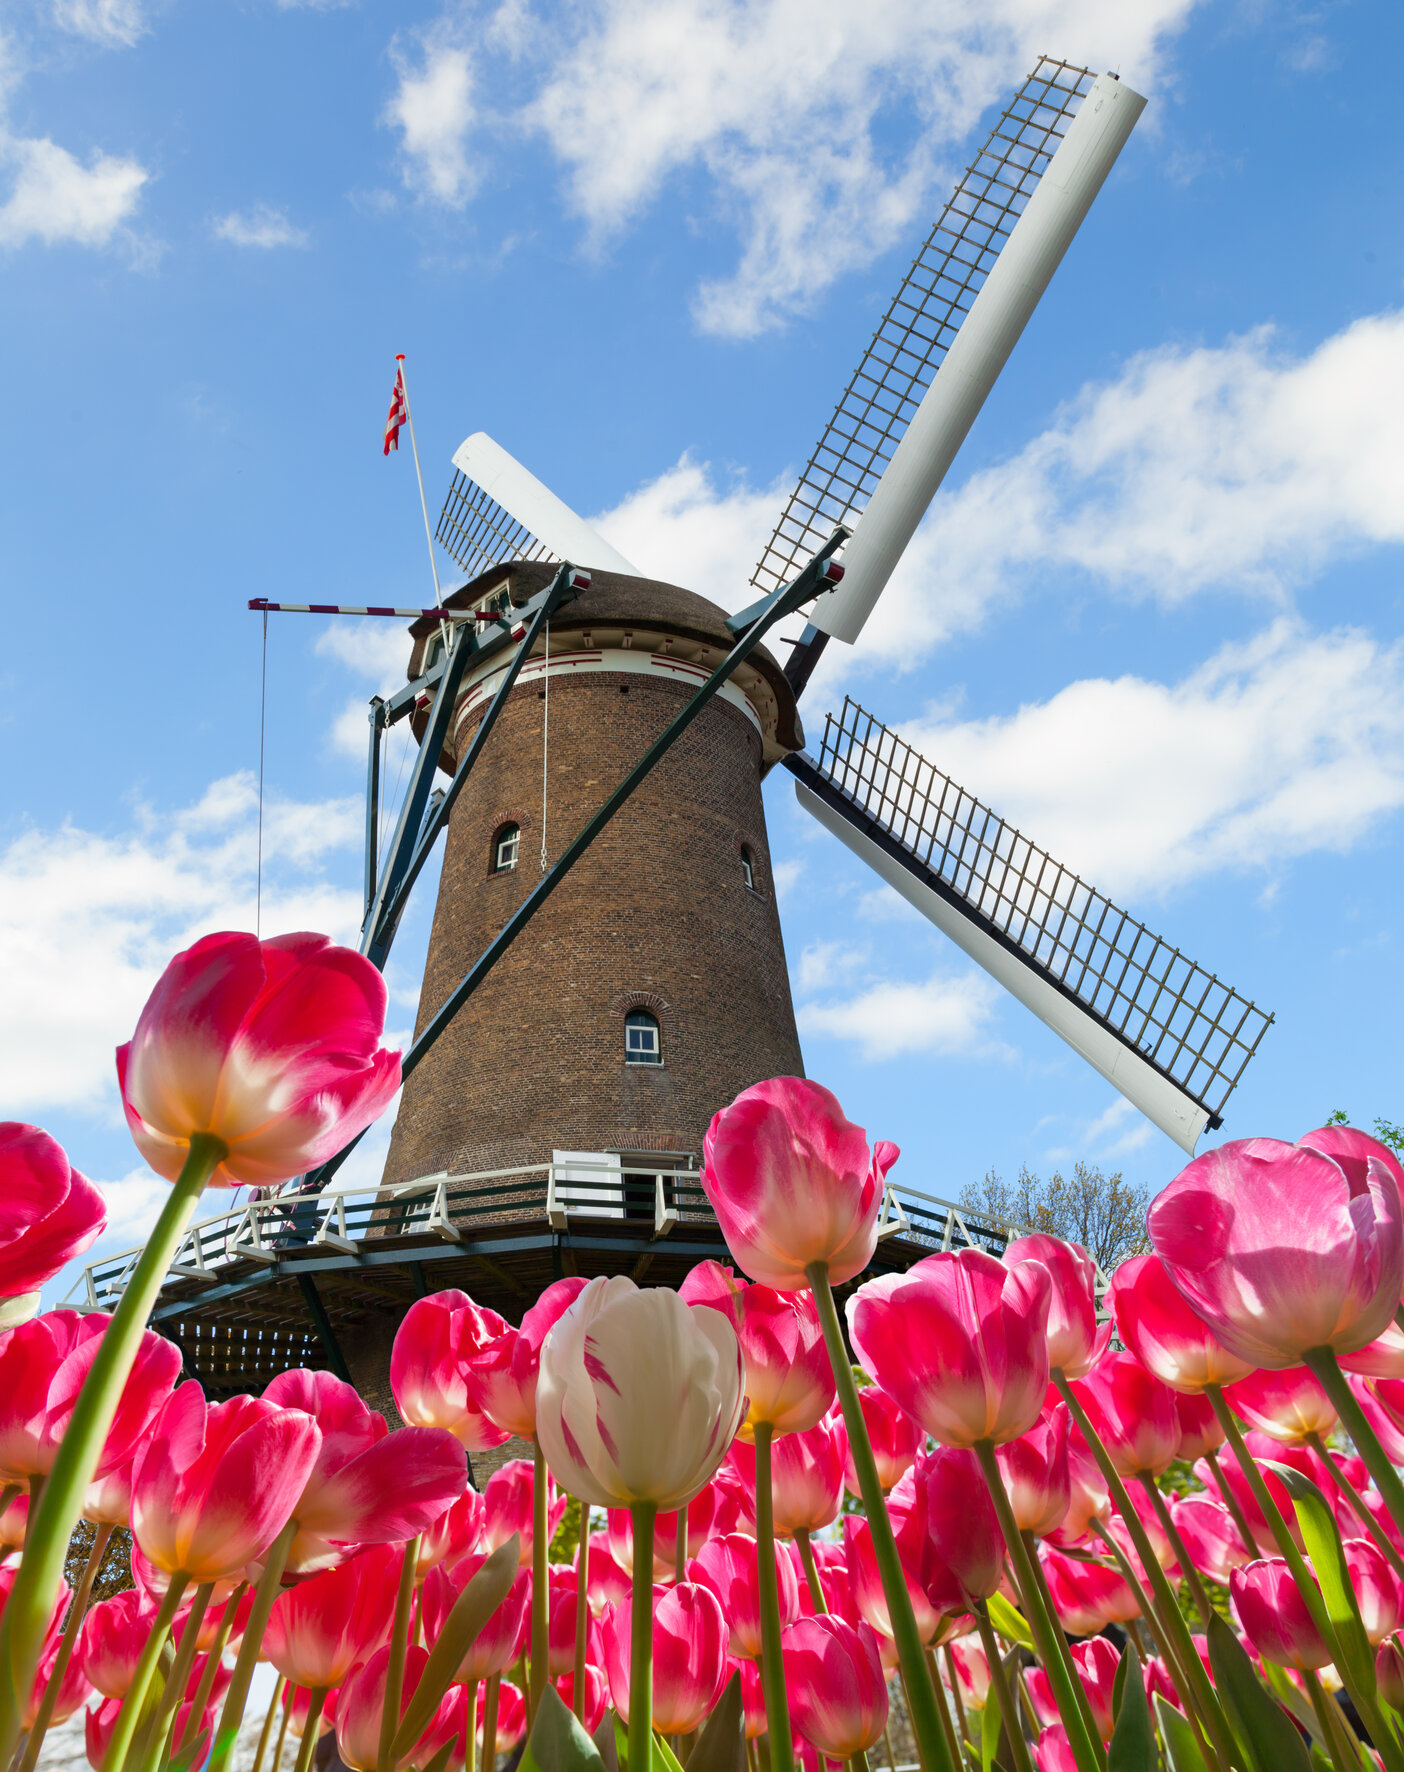 Vibrant tulips field with Dutch windmill, Netherlands. Beautiful cloudy sky